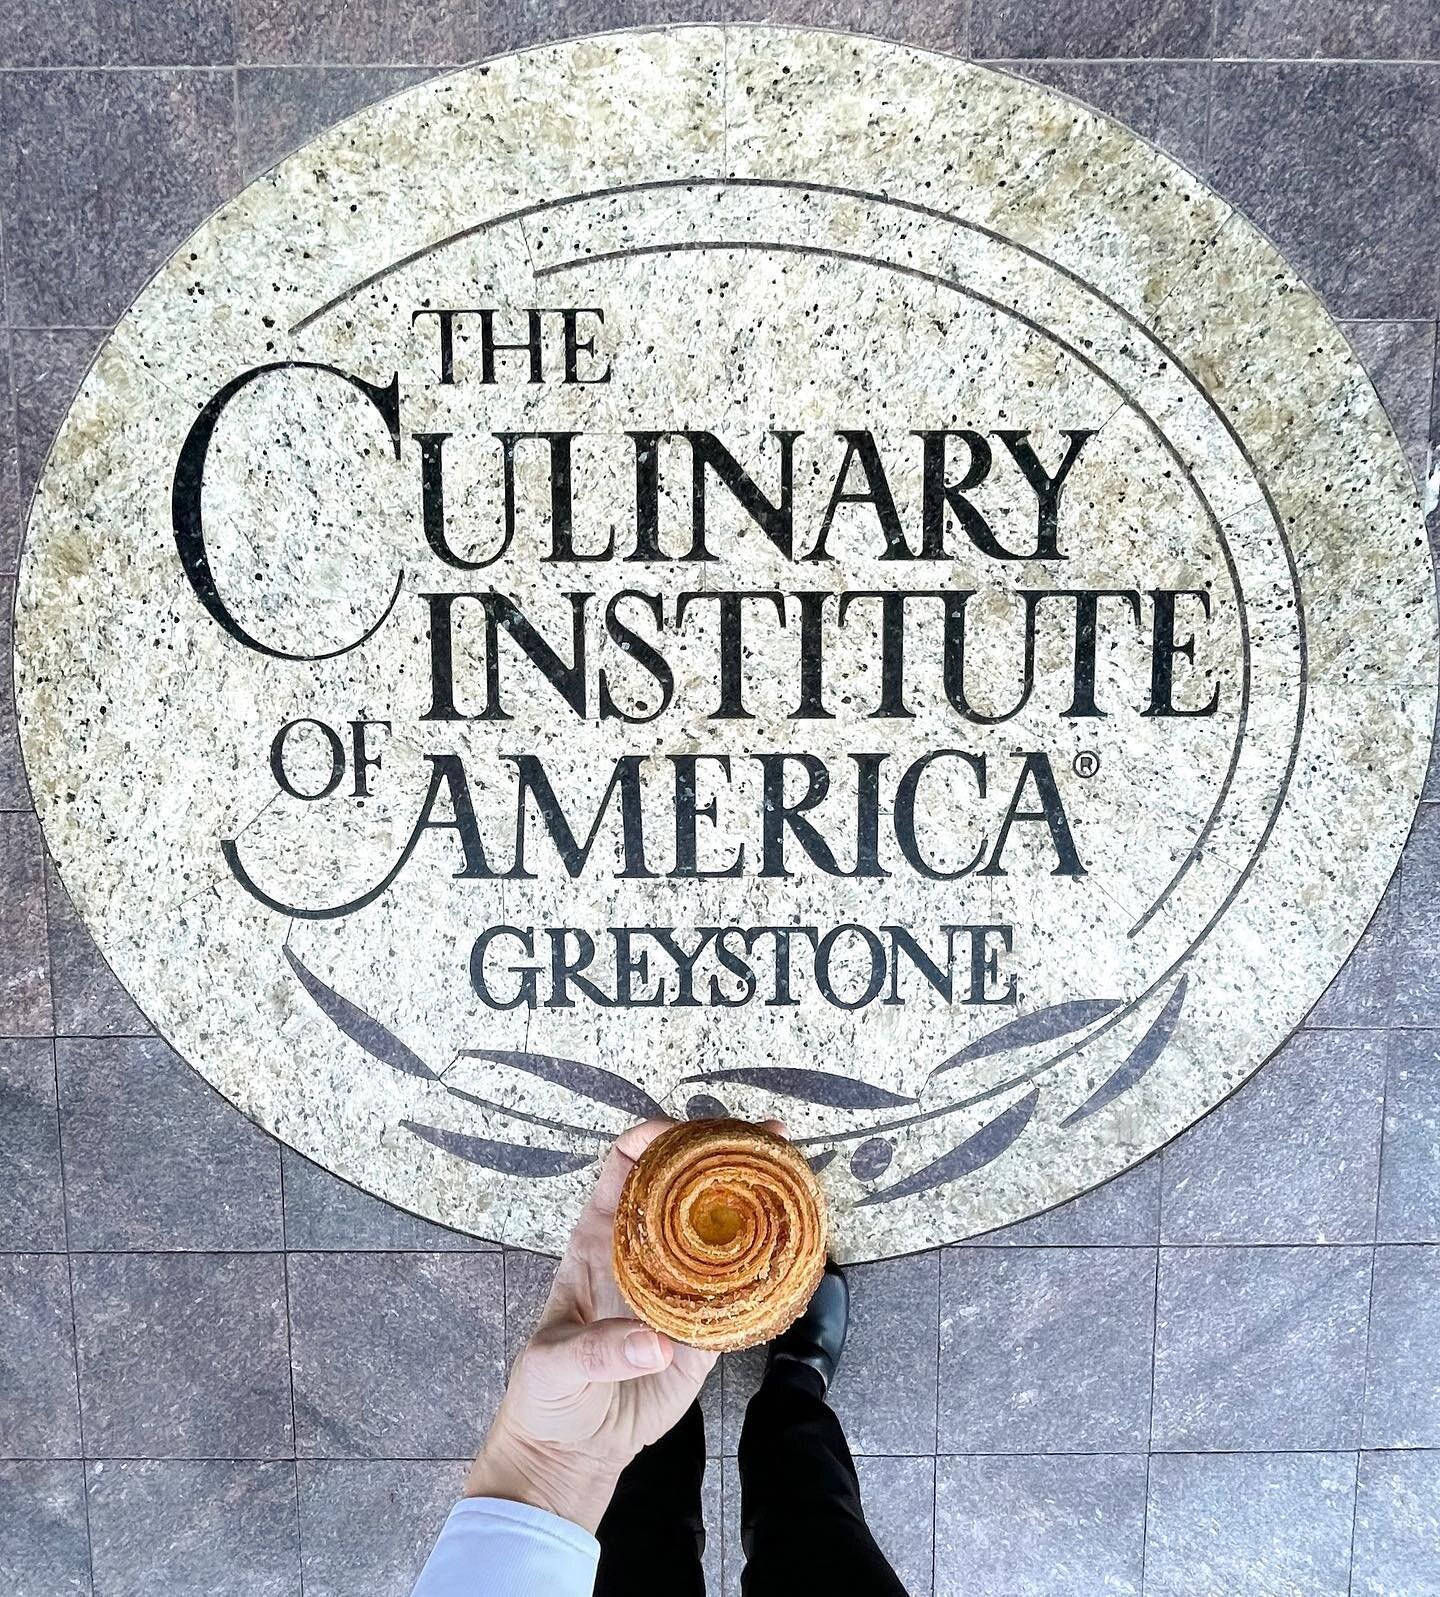 Those of you who know me well know that teaching, whether it is professionals or those new to our industry, is something I am truly passionate about. 

I am excited to share that I have accepted a professor role at the @theculinaryinstituteofamerica 